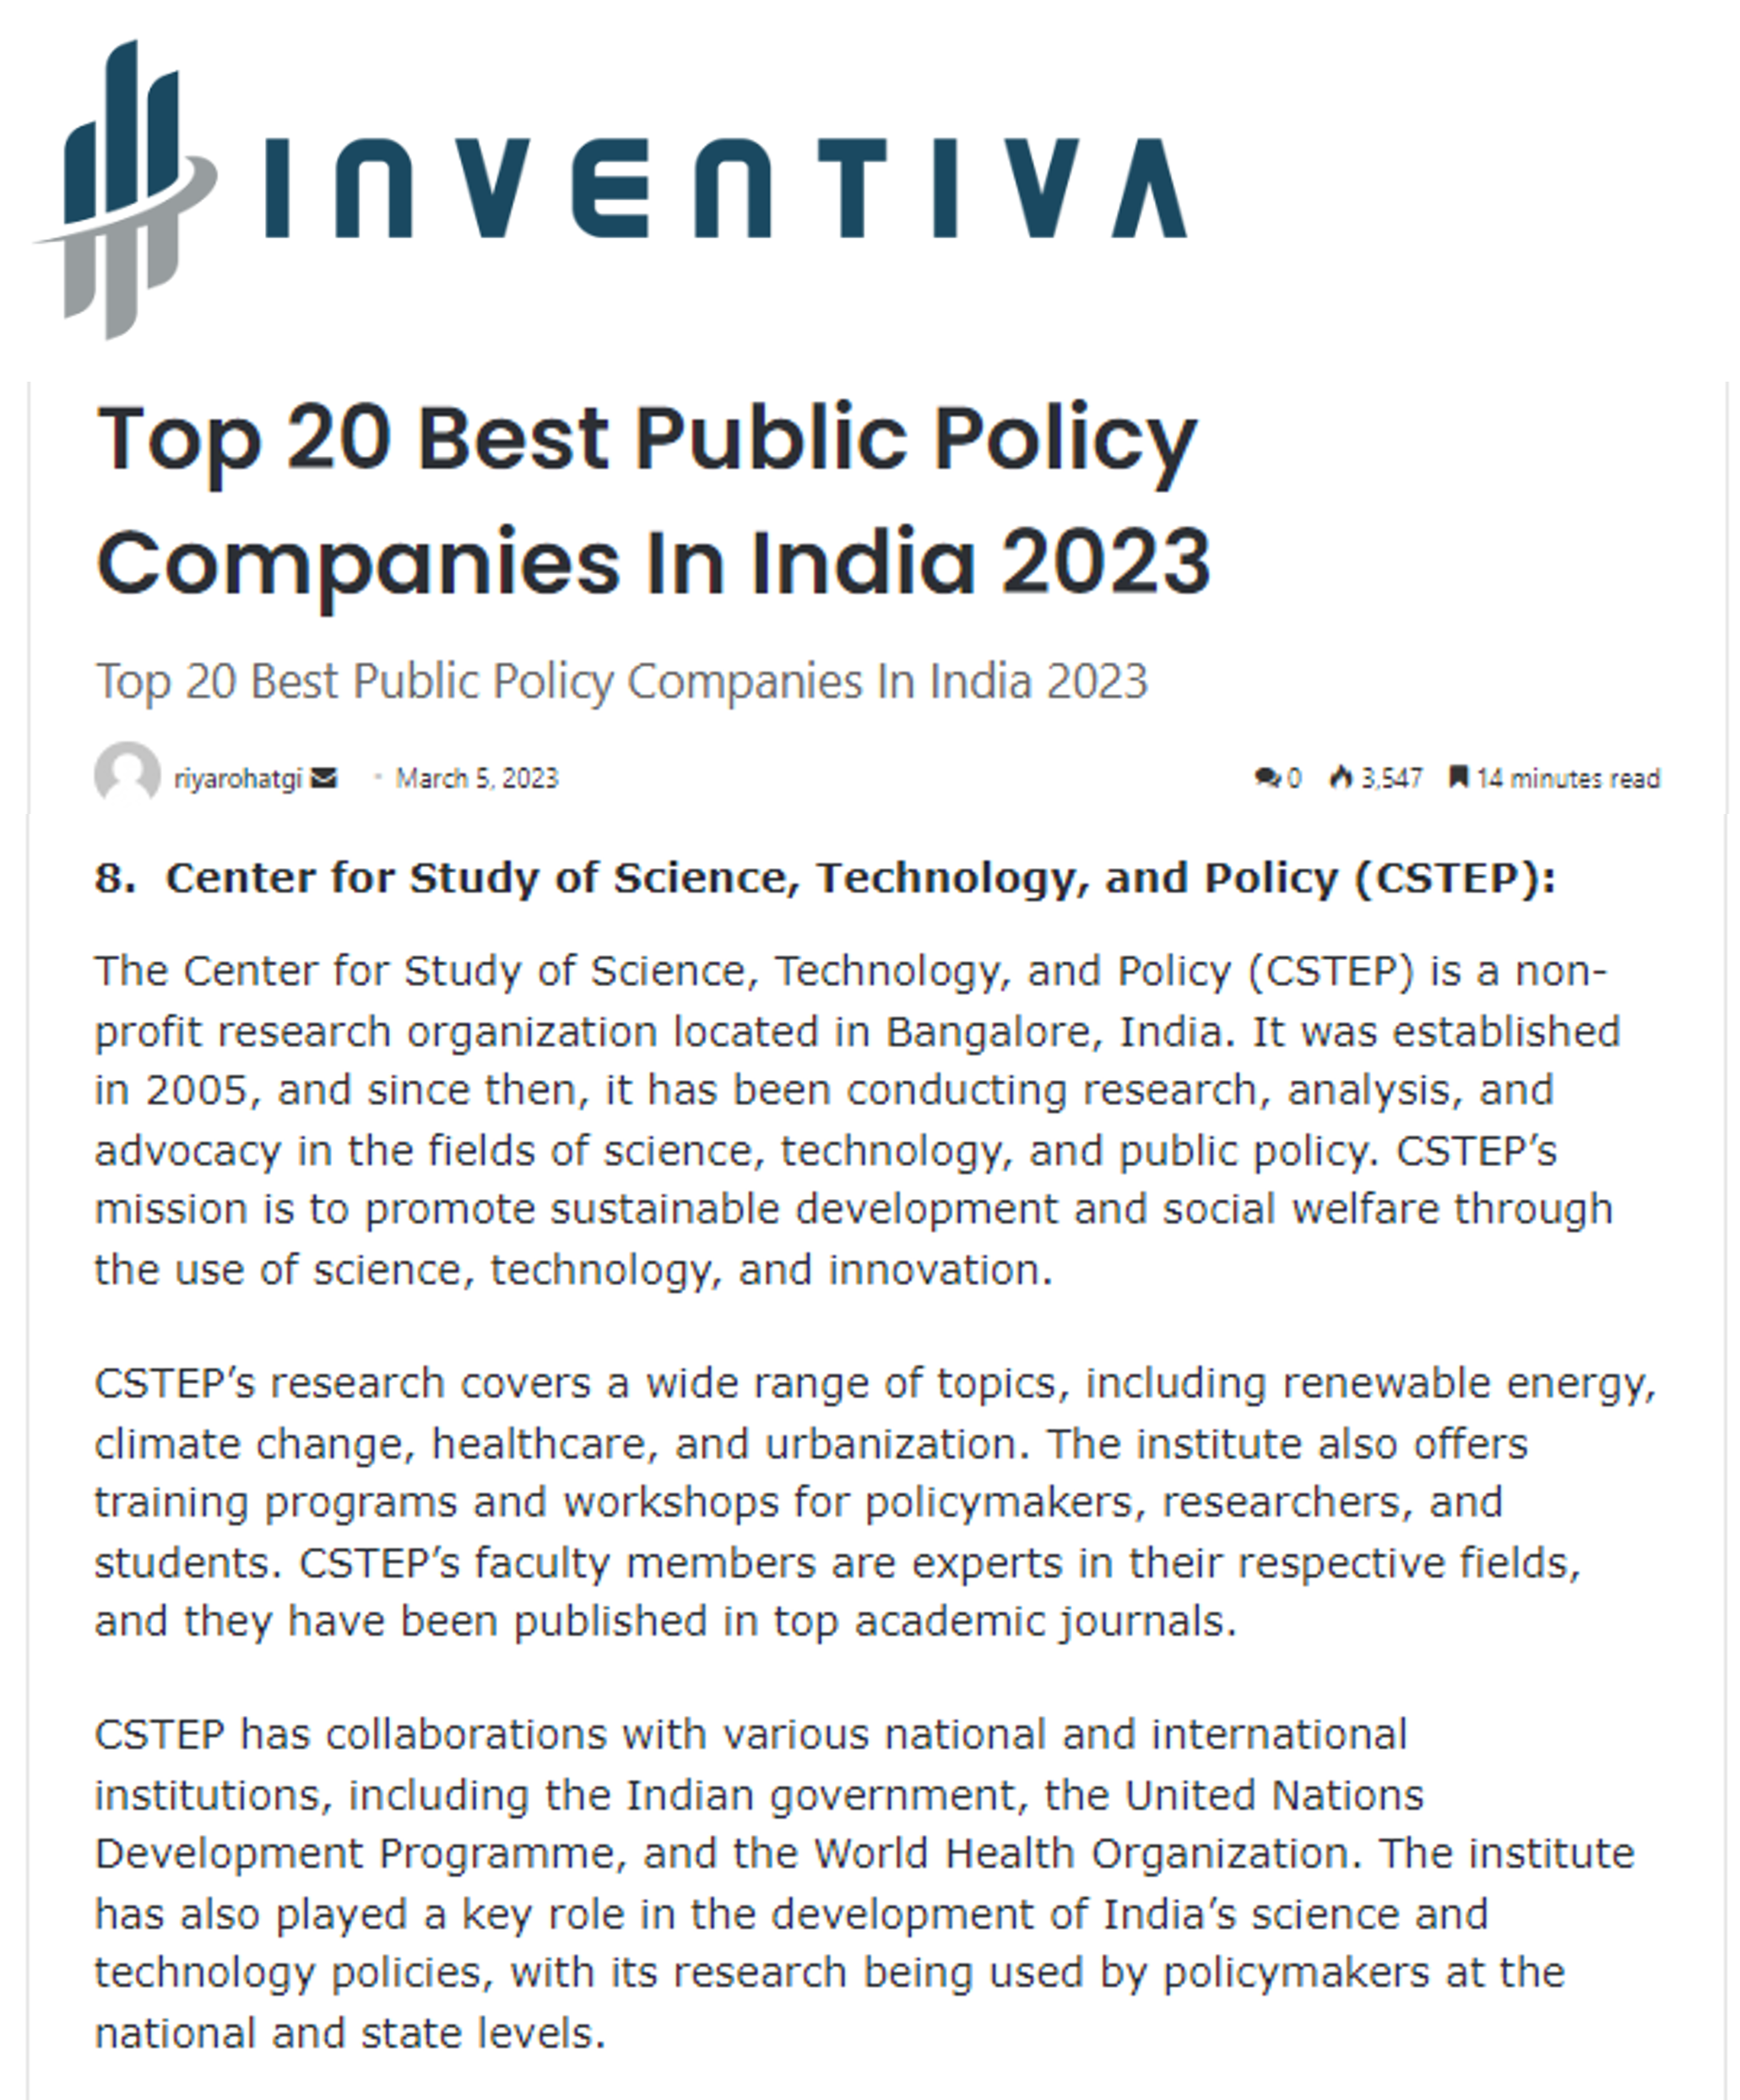 CSTEP mentioned as one of the top 20 public policy companies in India in 2023 by Inventiva